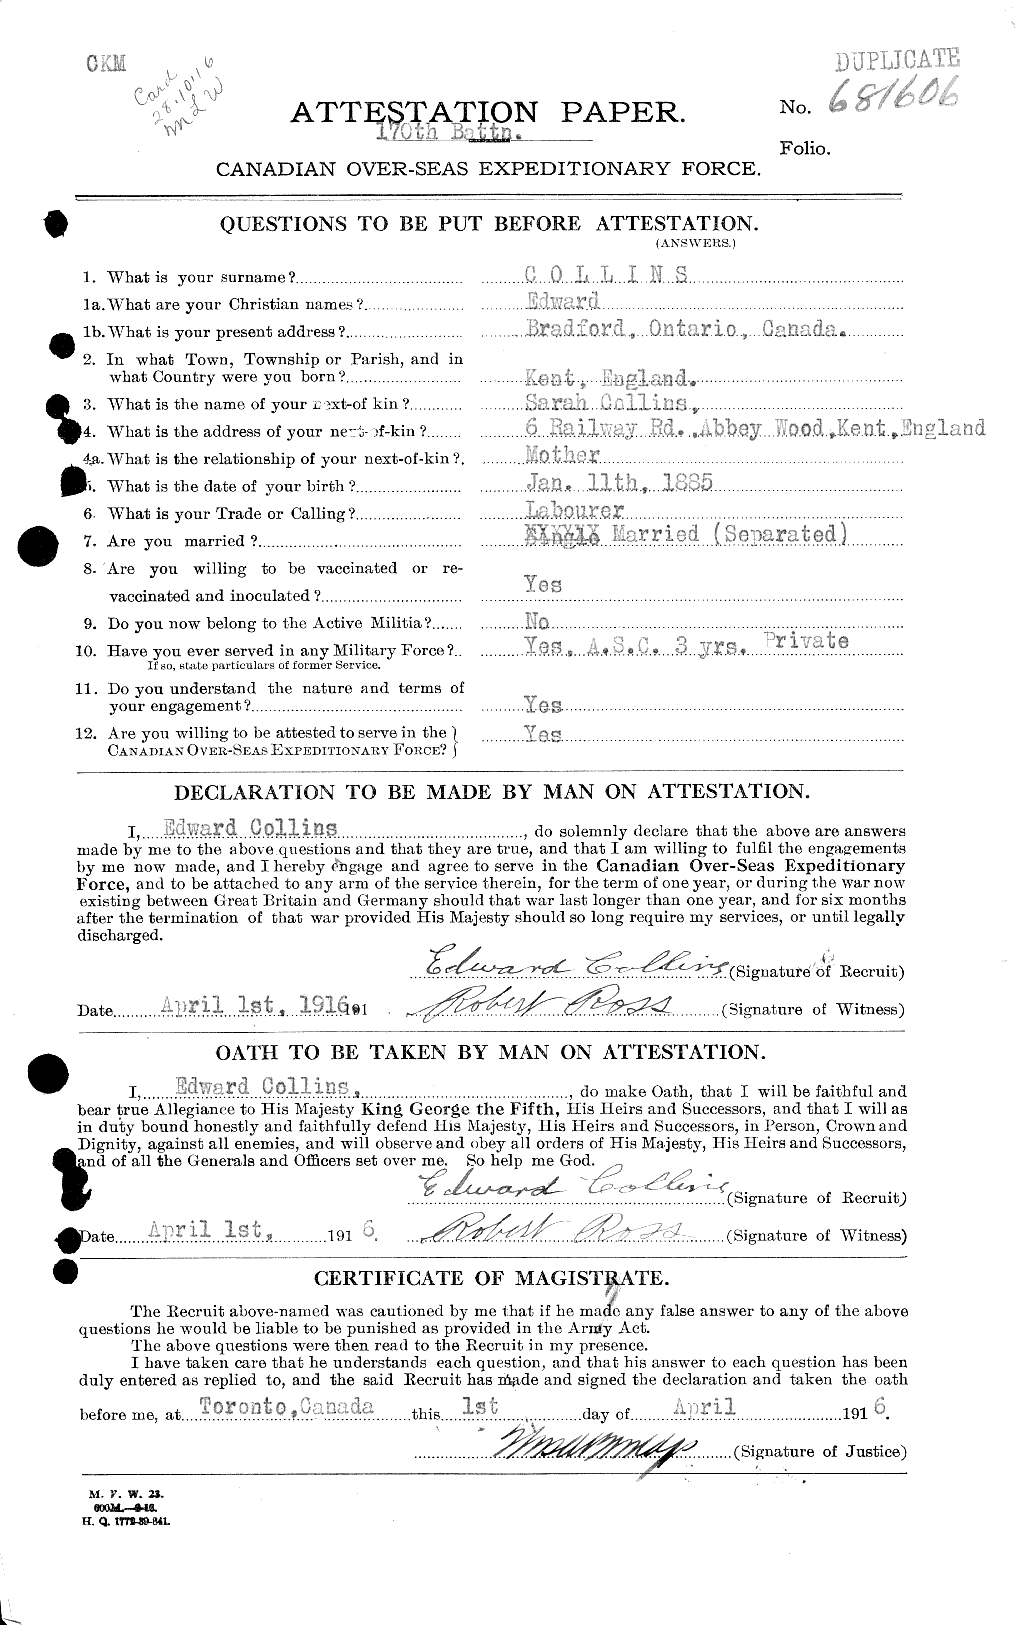 Personnel Records of the First World War - CEF 037737a